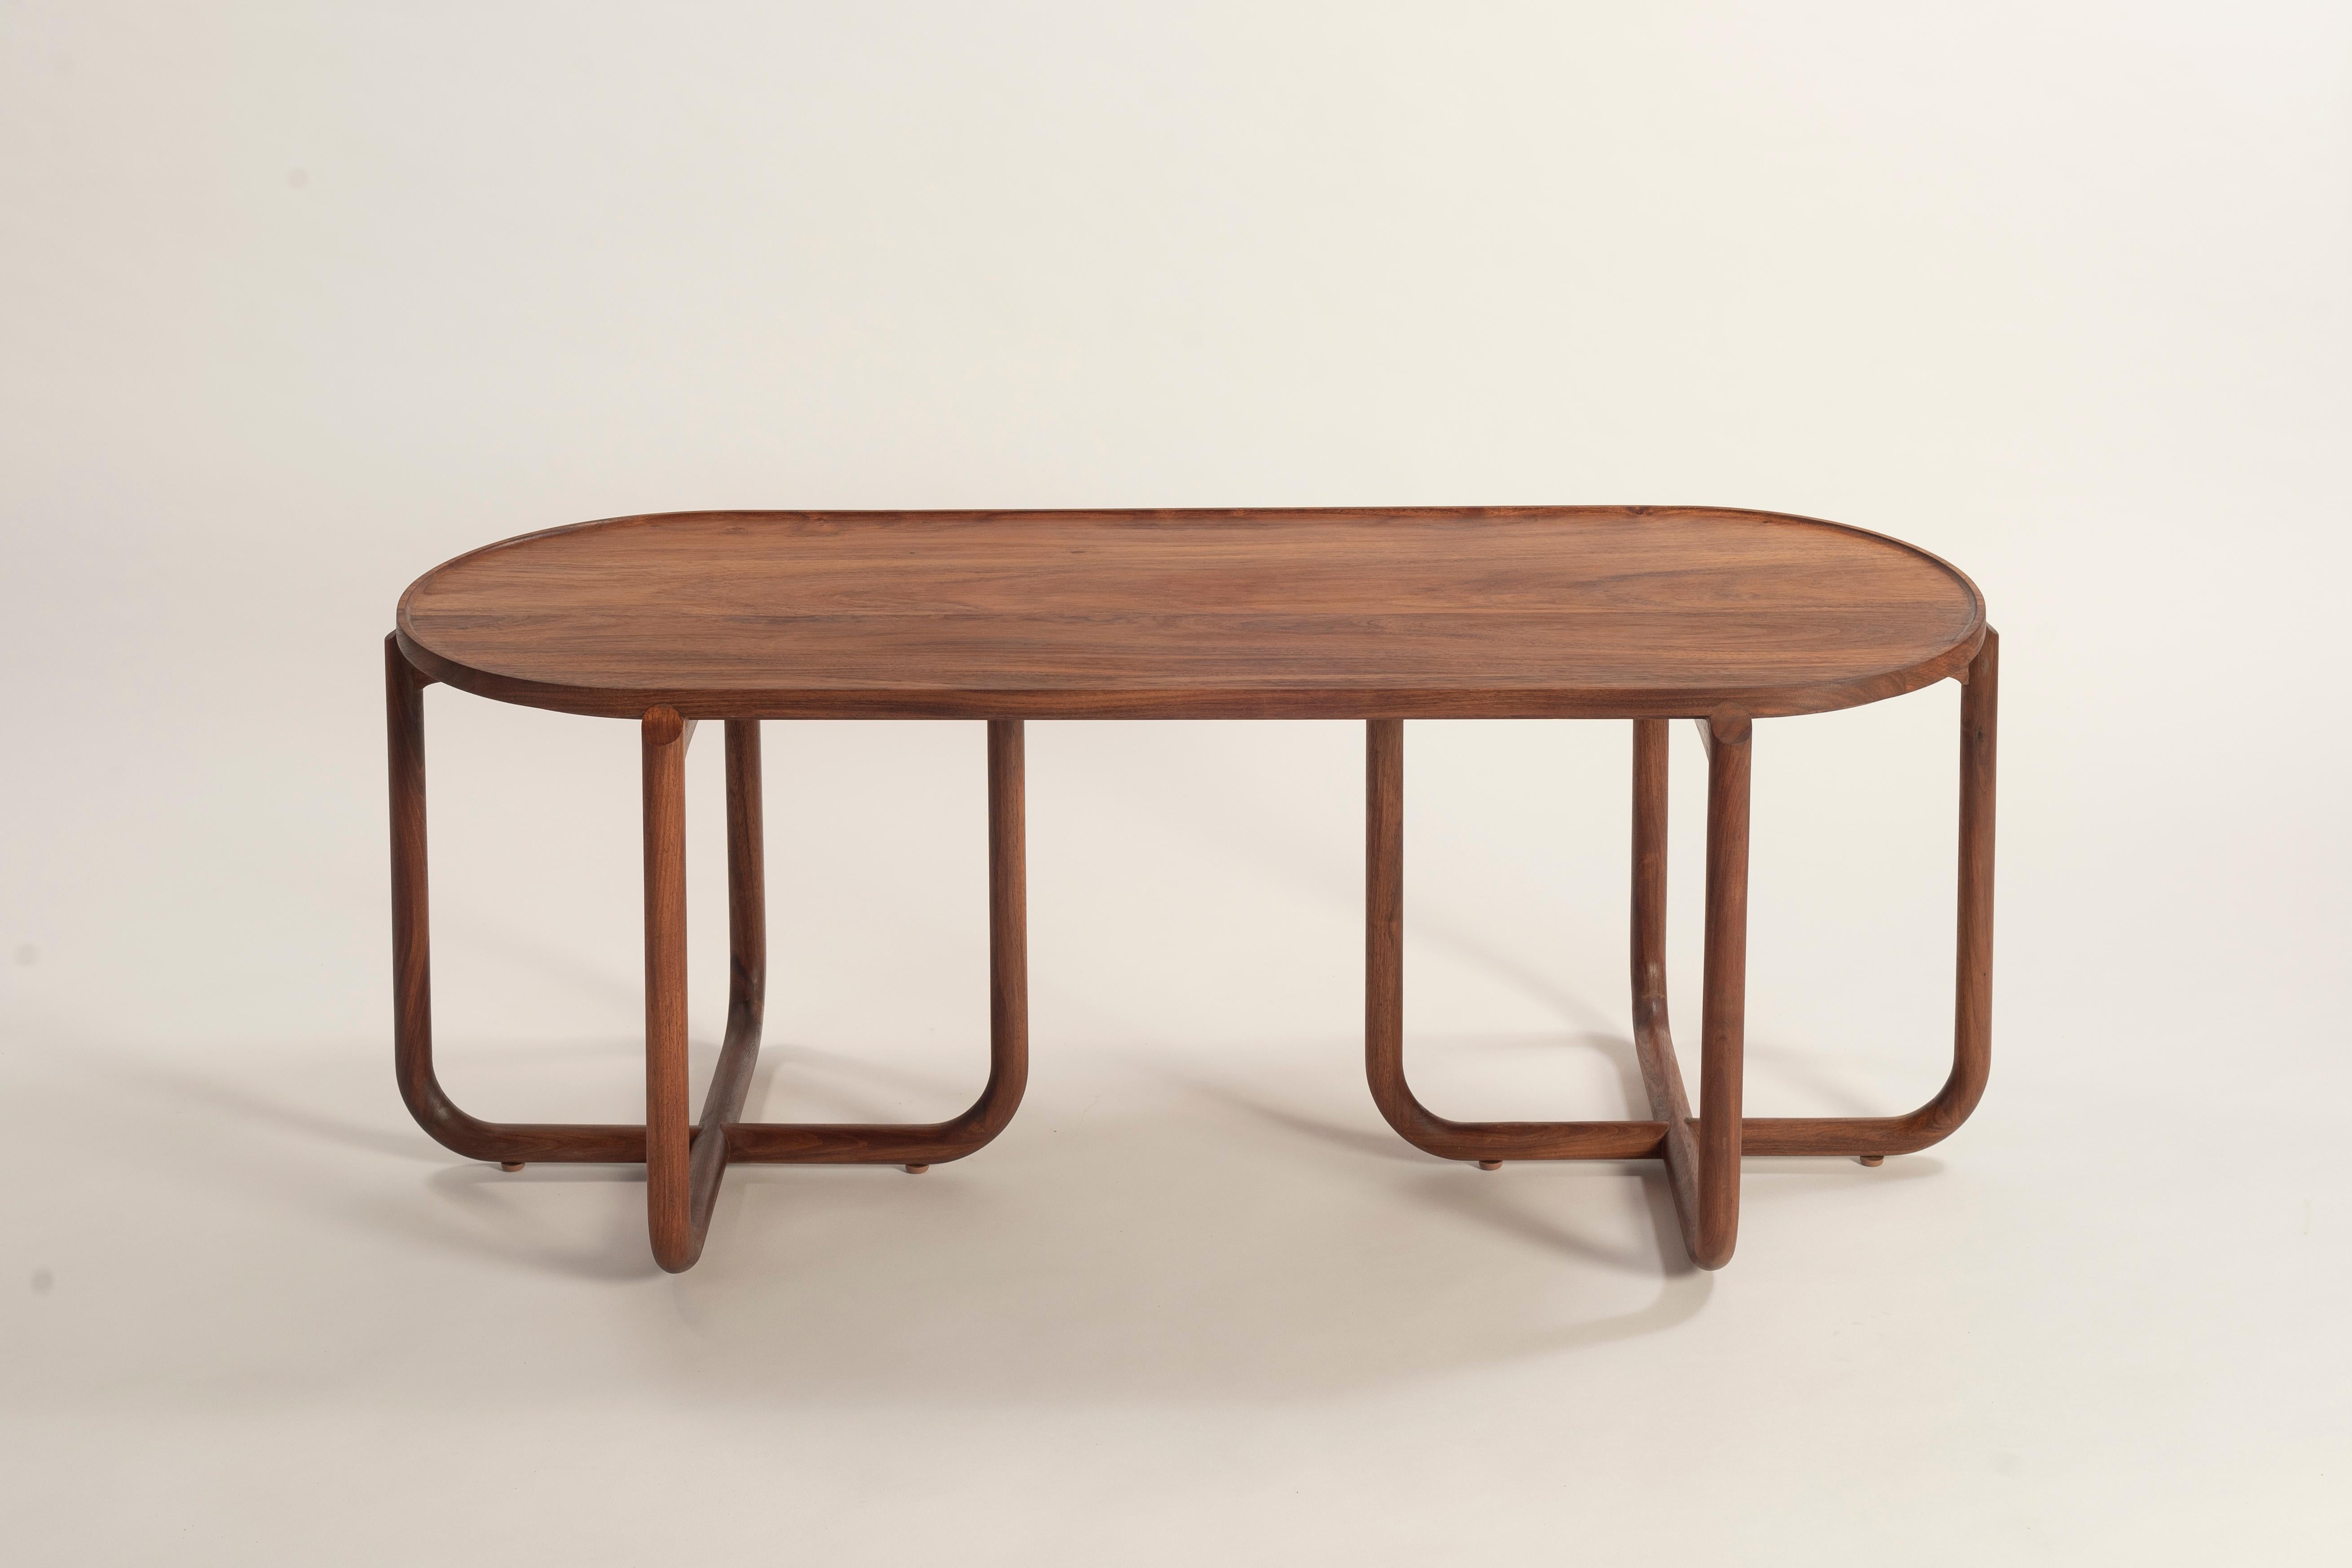 The Verso table owes its organic anatomy to the two intersecting cords to create a sinuous base, which ascends providing the delicate assembly that accentuates the circular top. The rhythm of its composition proposes a dialogue that captures the